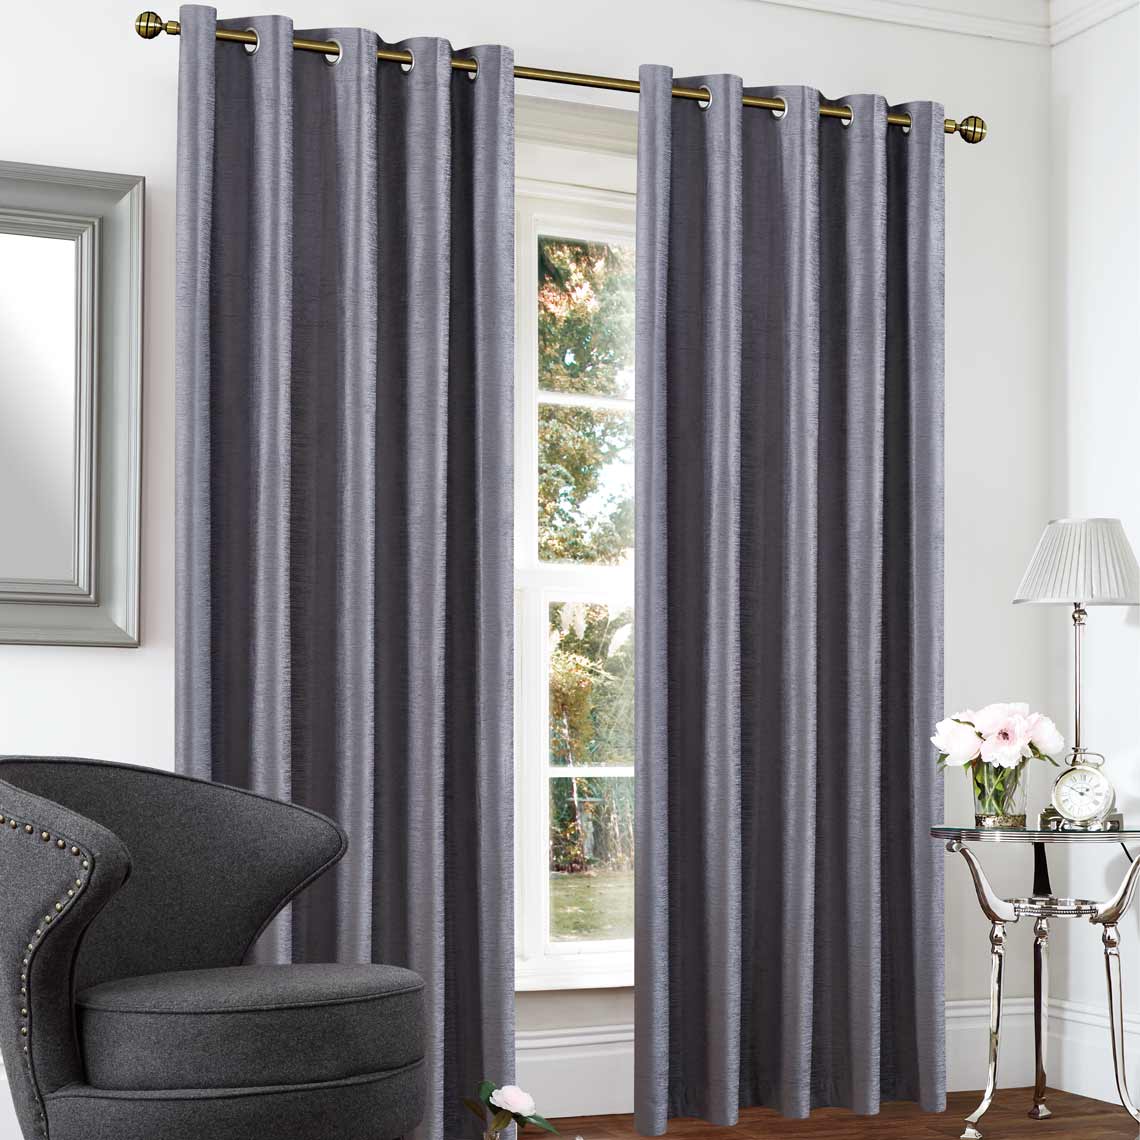 Blackout & Thermal Textured Curtains - Home Store + More